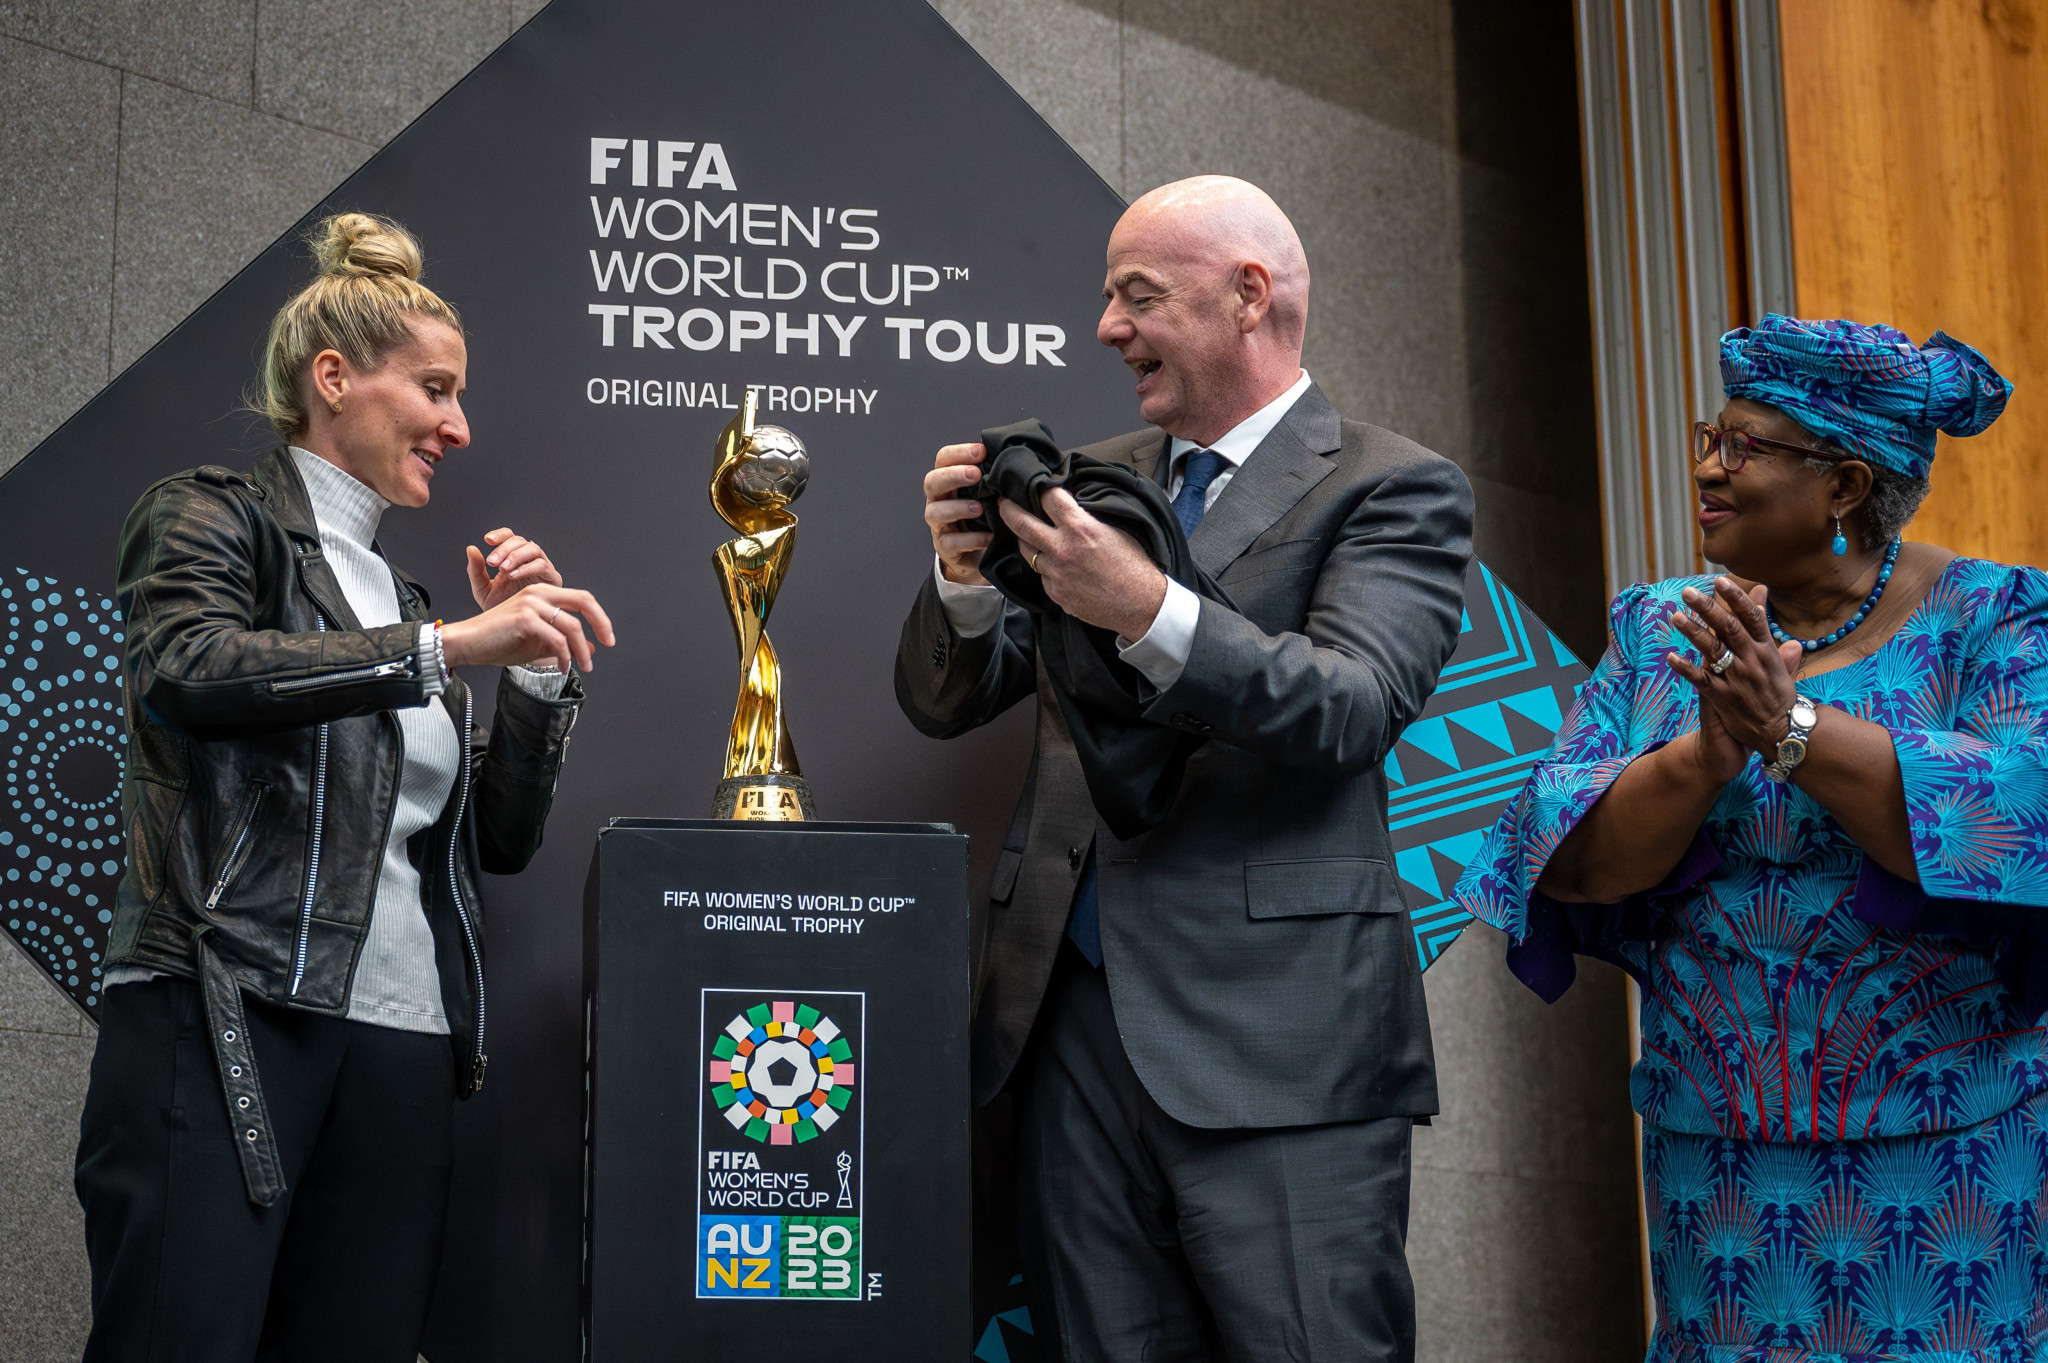 EBU strikes deal to show FIFA Women’s World Cup in "Big Five" after blackout warning